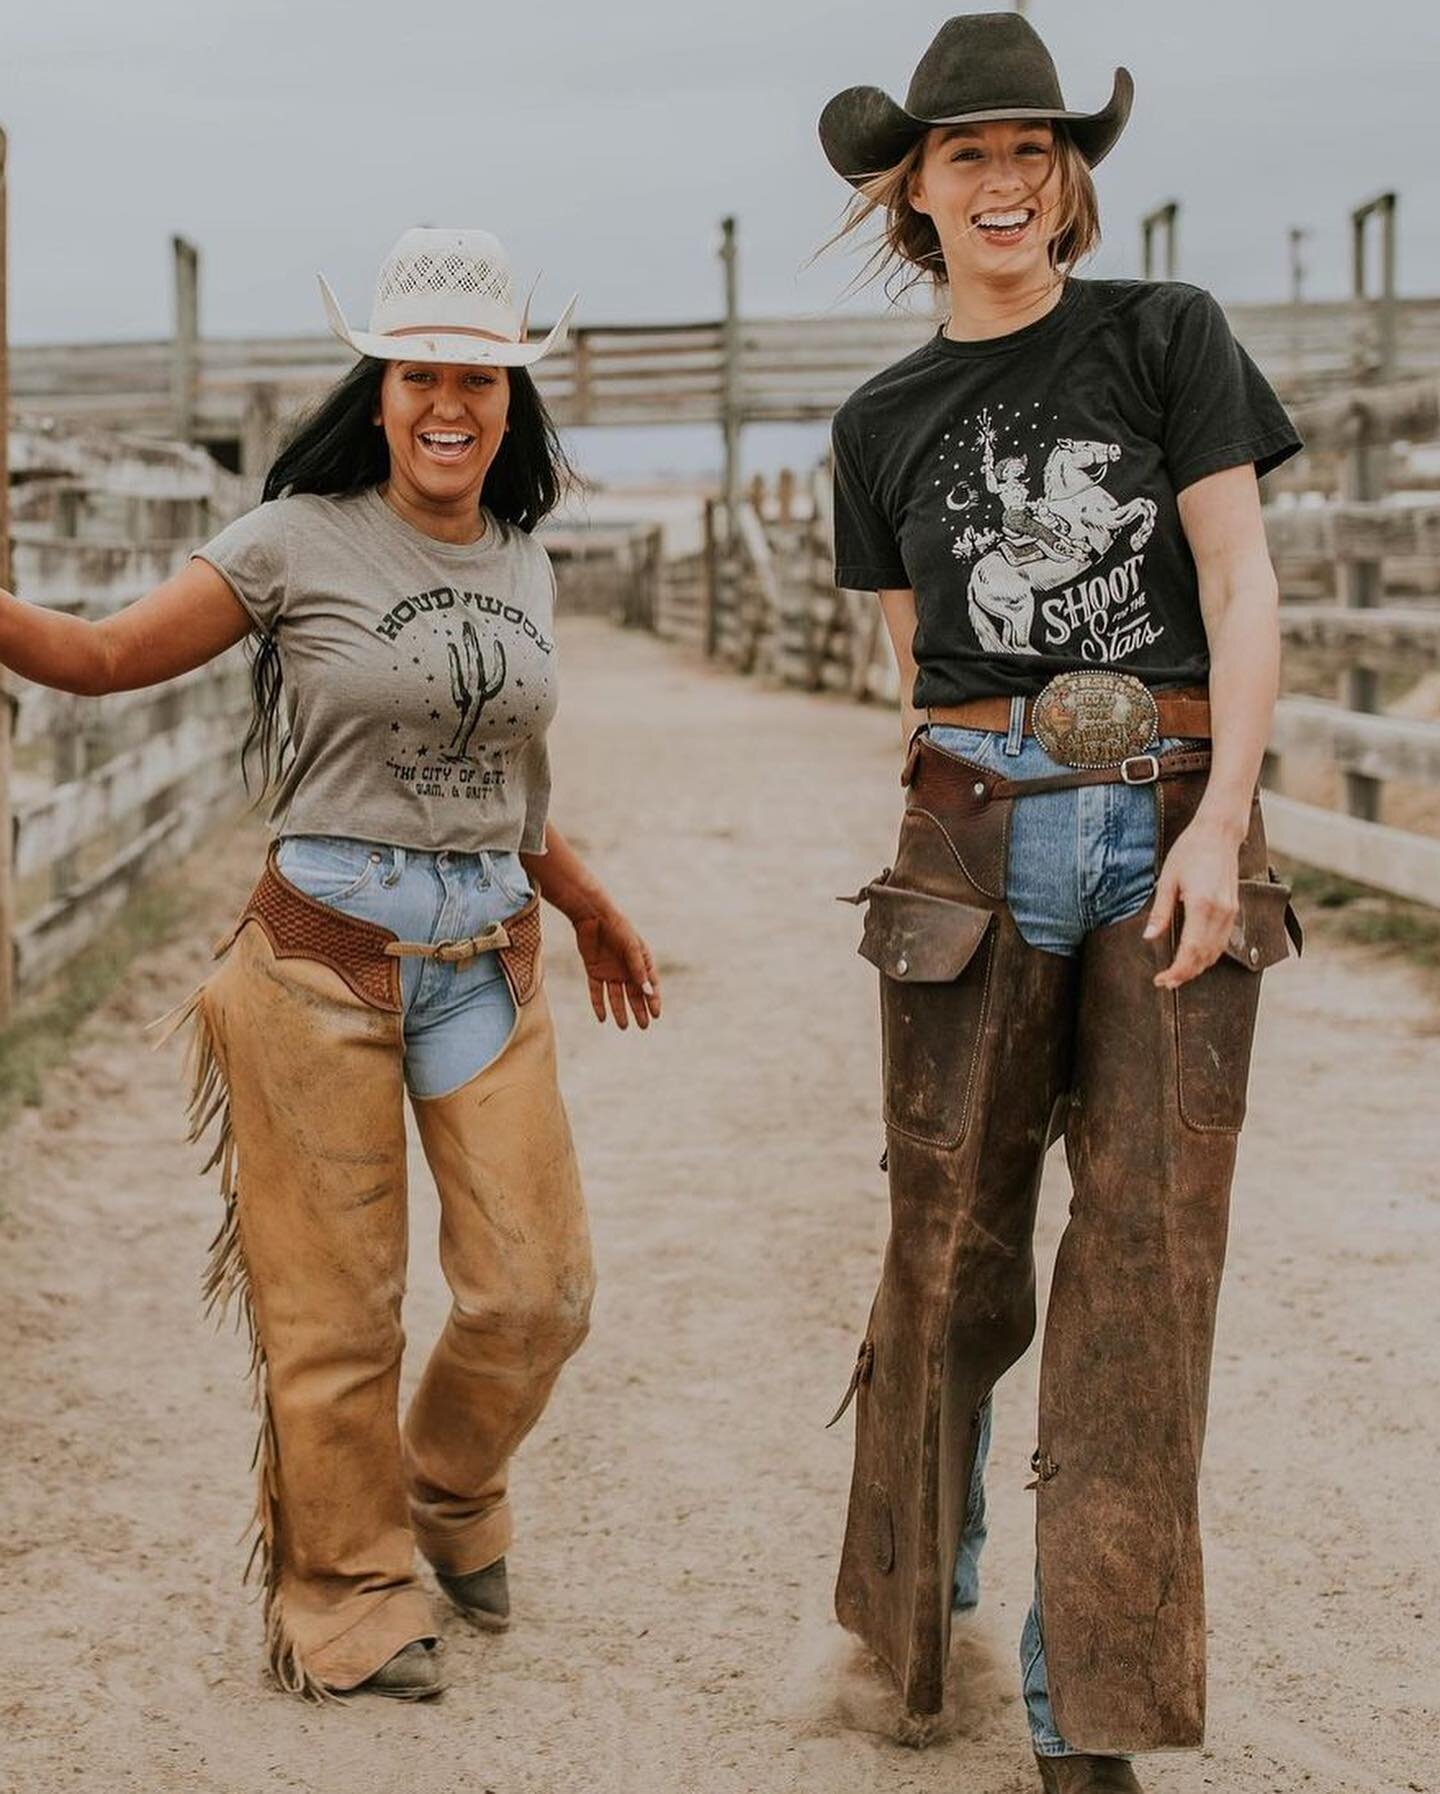 Which Ali Dee Brand Tee is your favorite?! 🤠

One of our favorite Western Graphic Tee Brands ✨ @alideebrand